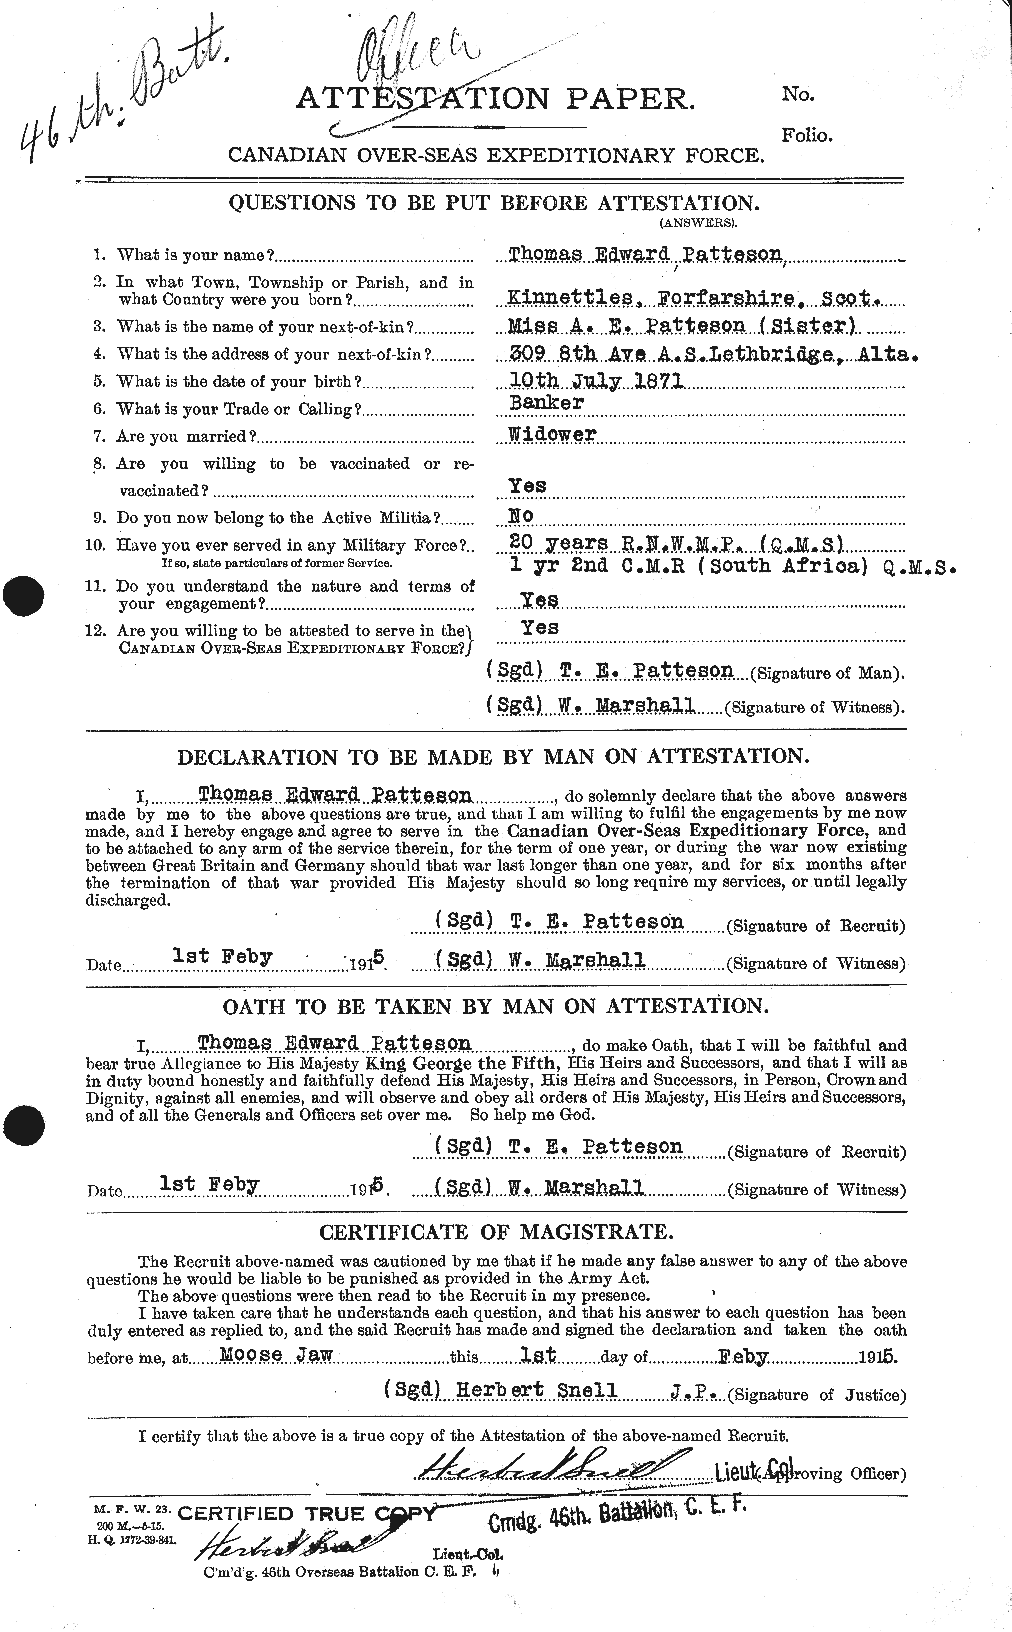 Personnel Records of the First World War - CEF 568889a